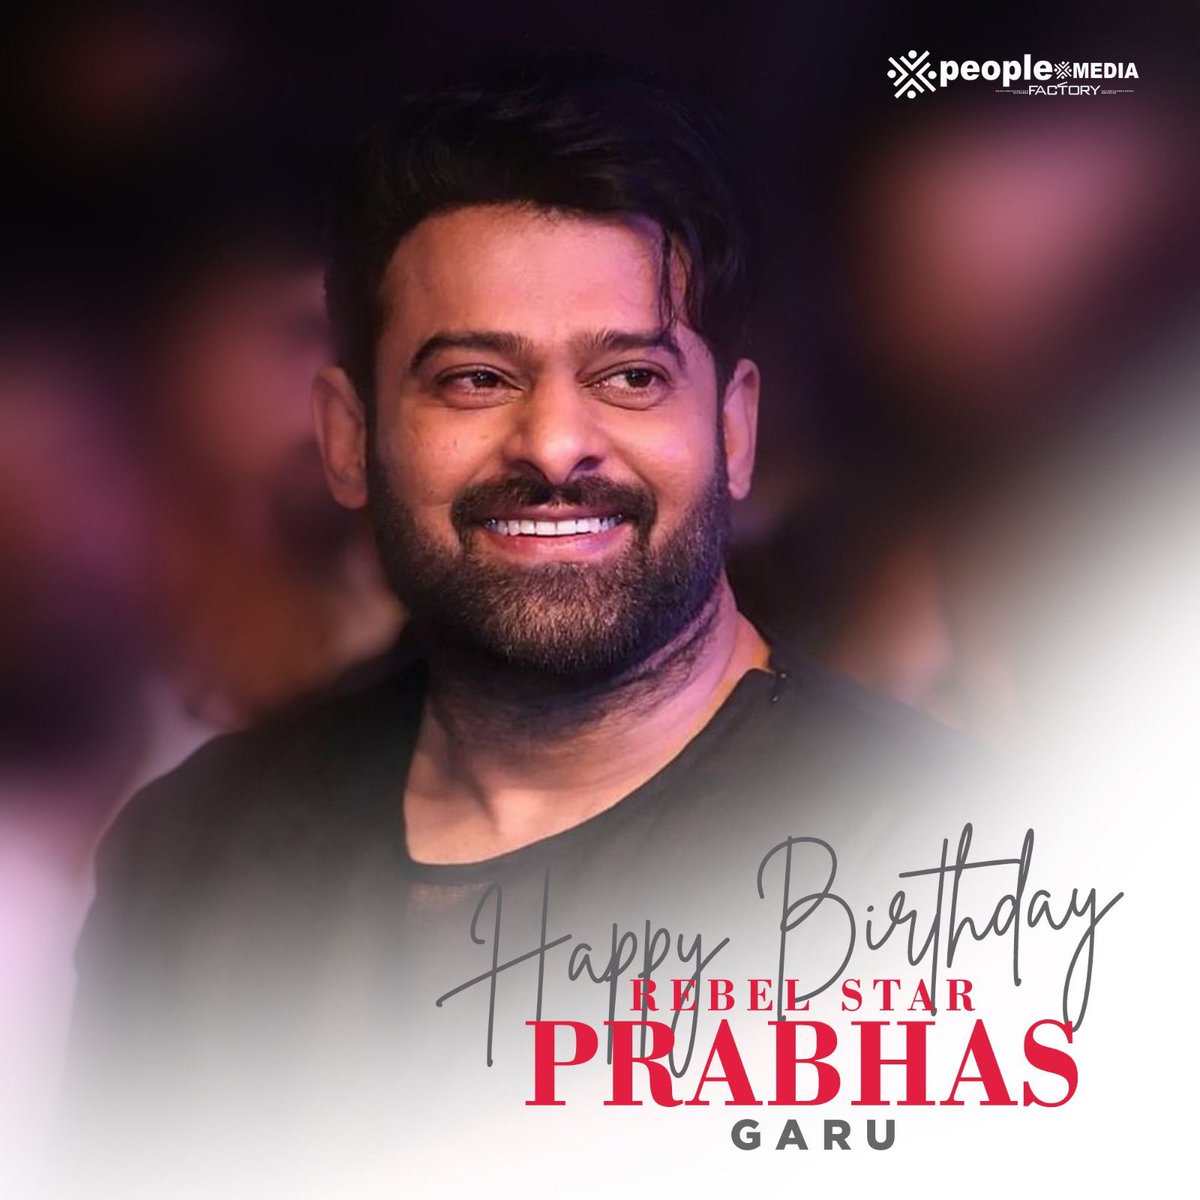 Happy Birthdayy Darling #Prabhas sir ❤️ May this year bring you more success and happiness. Wishing you an incredible journey ahead! 🌟 #HappyBirthdayPrabhas